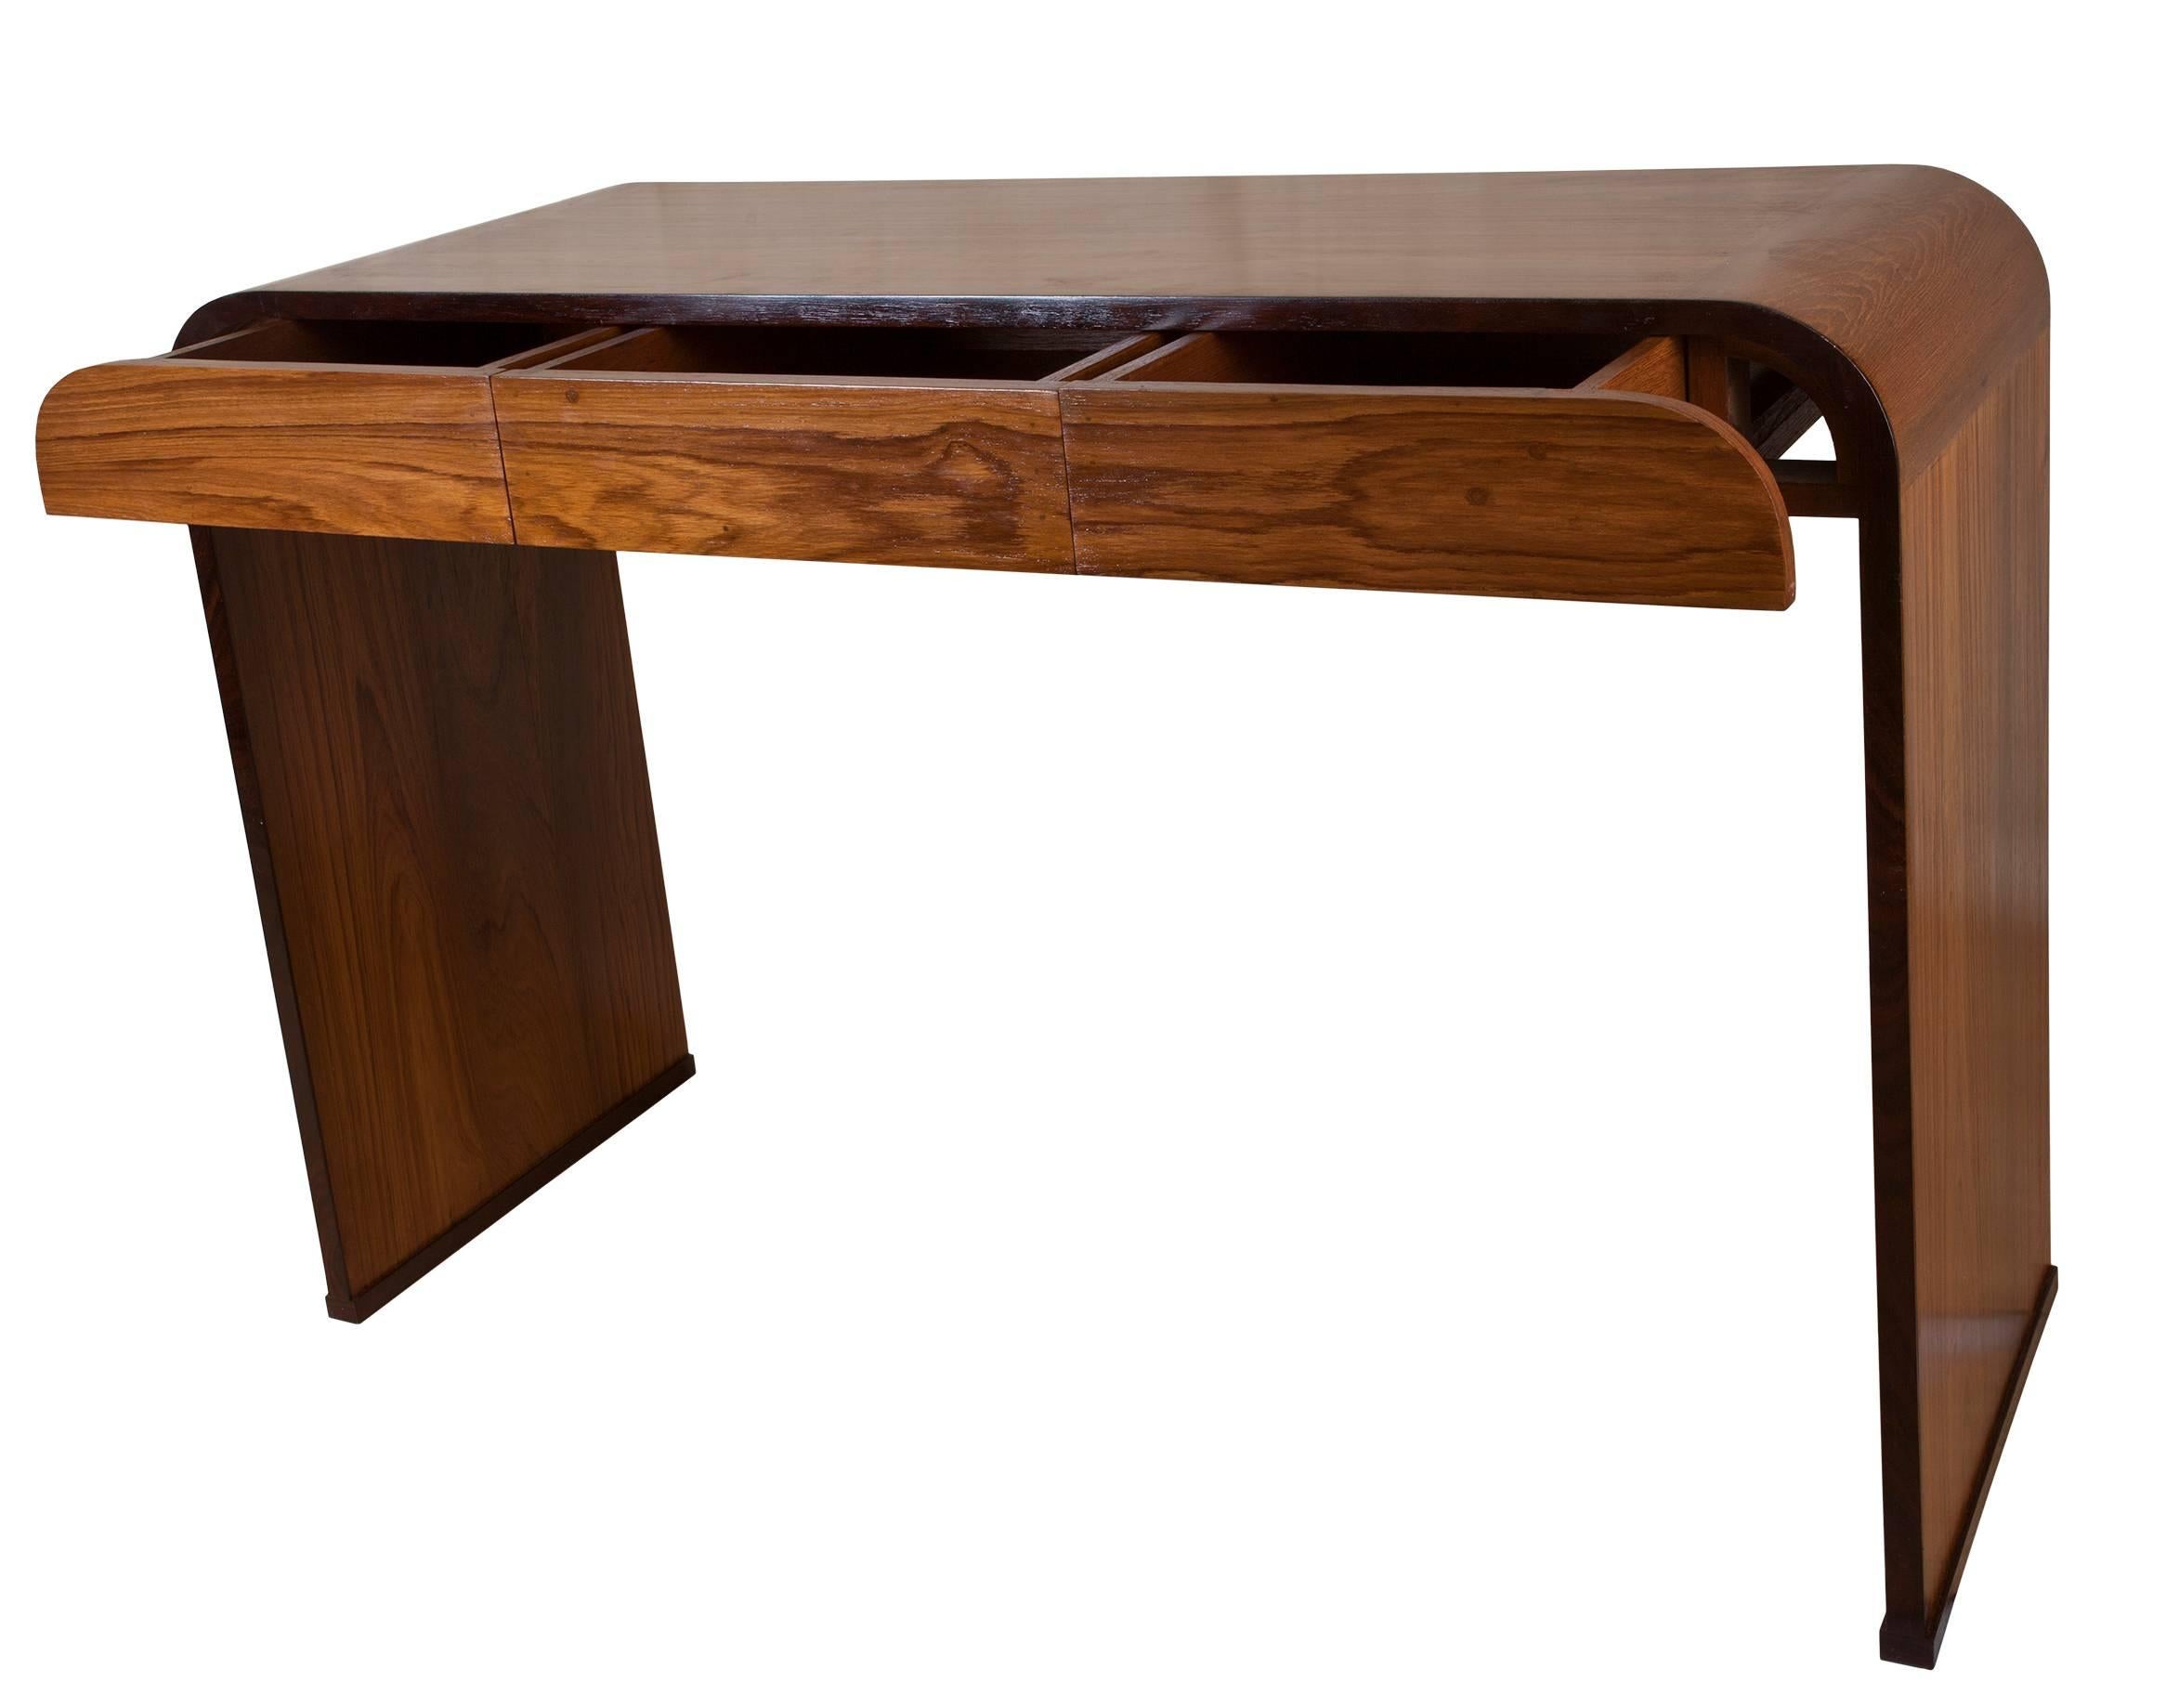 Mid-Century Modern 'waterfall' desk made of teak with rosewood borders. Three front drawers, the two on the sides have rounded corners. Refinished. Great to use as a desk, console or sofa table. Elegant lines and lovely wood grain. Height from the